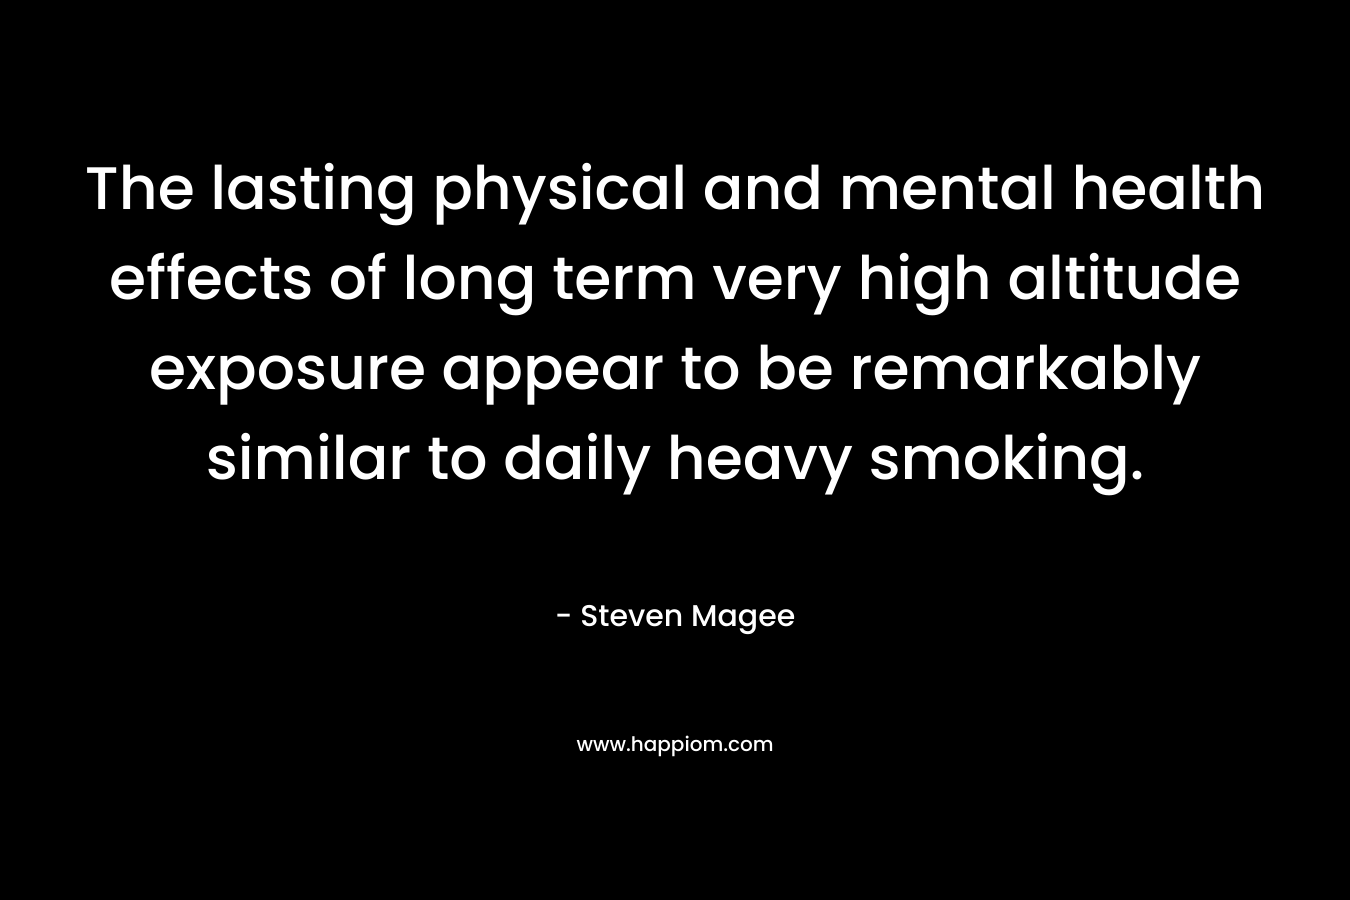 The lasting physical and mental health effects of long term very high altitude exposure appear to be remarkably similar to daily heavy smoking.